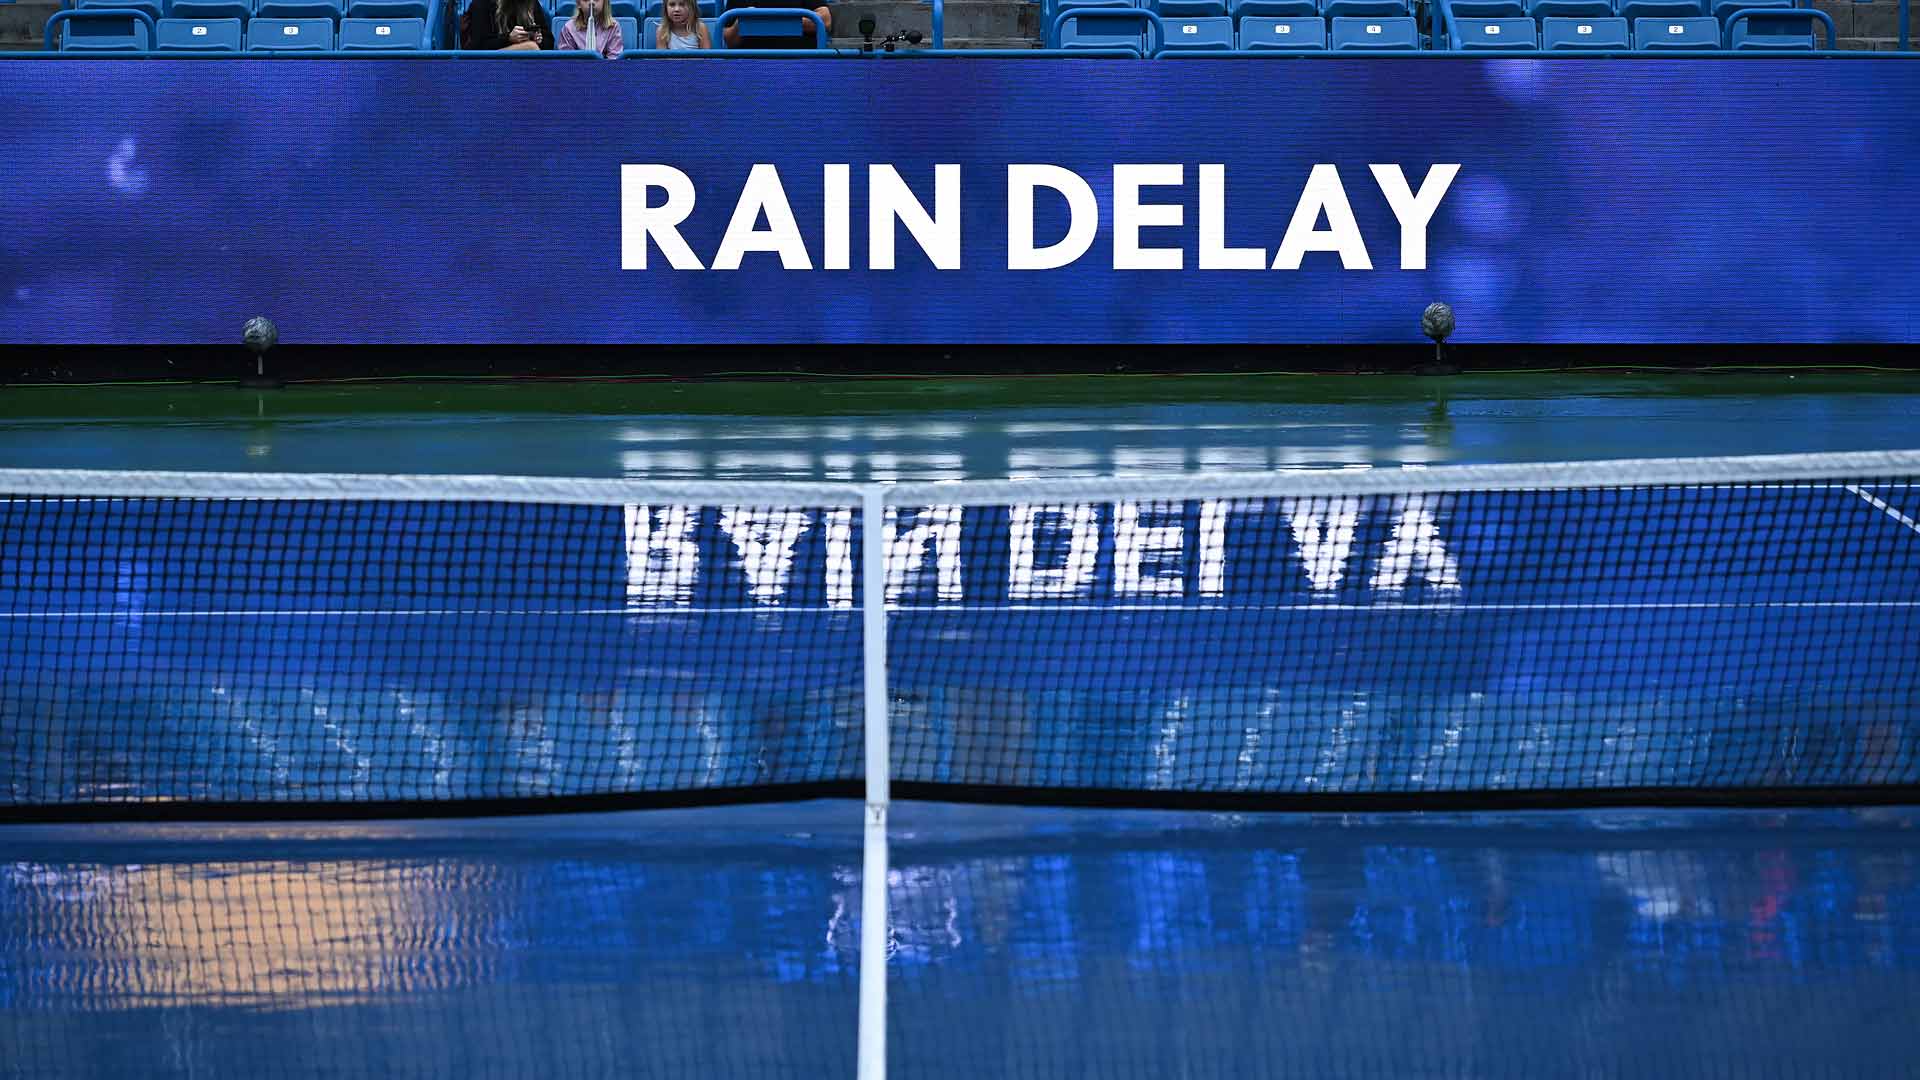 Rain is postponing play at the Western & Southern Open.